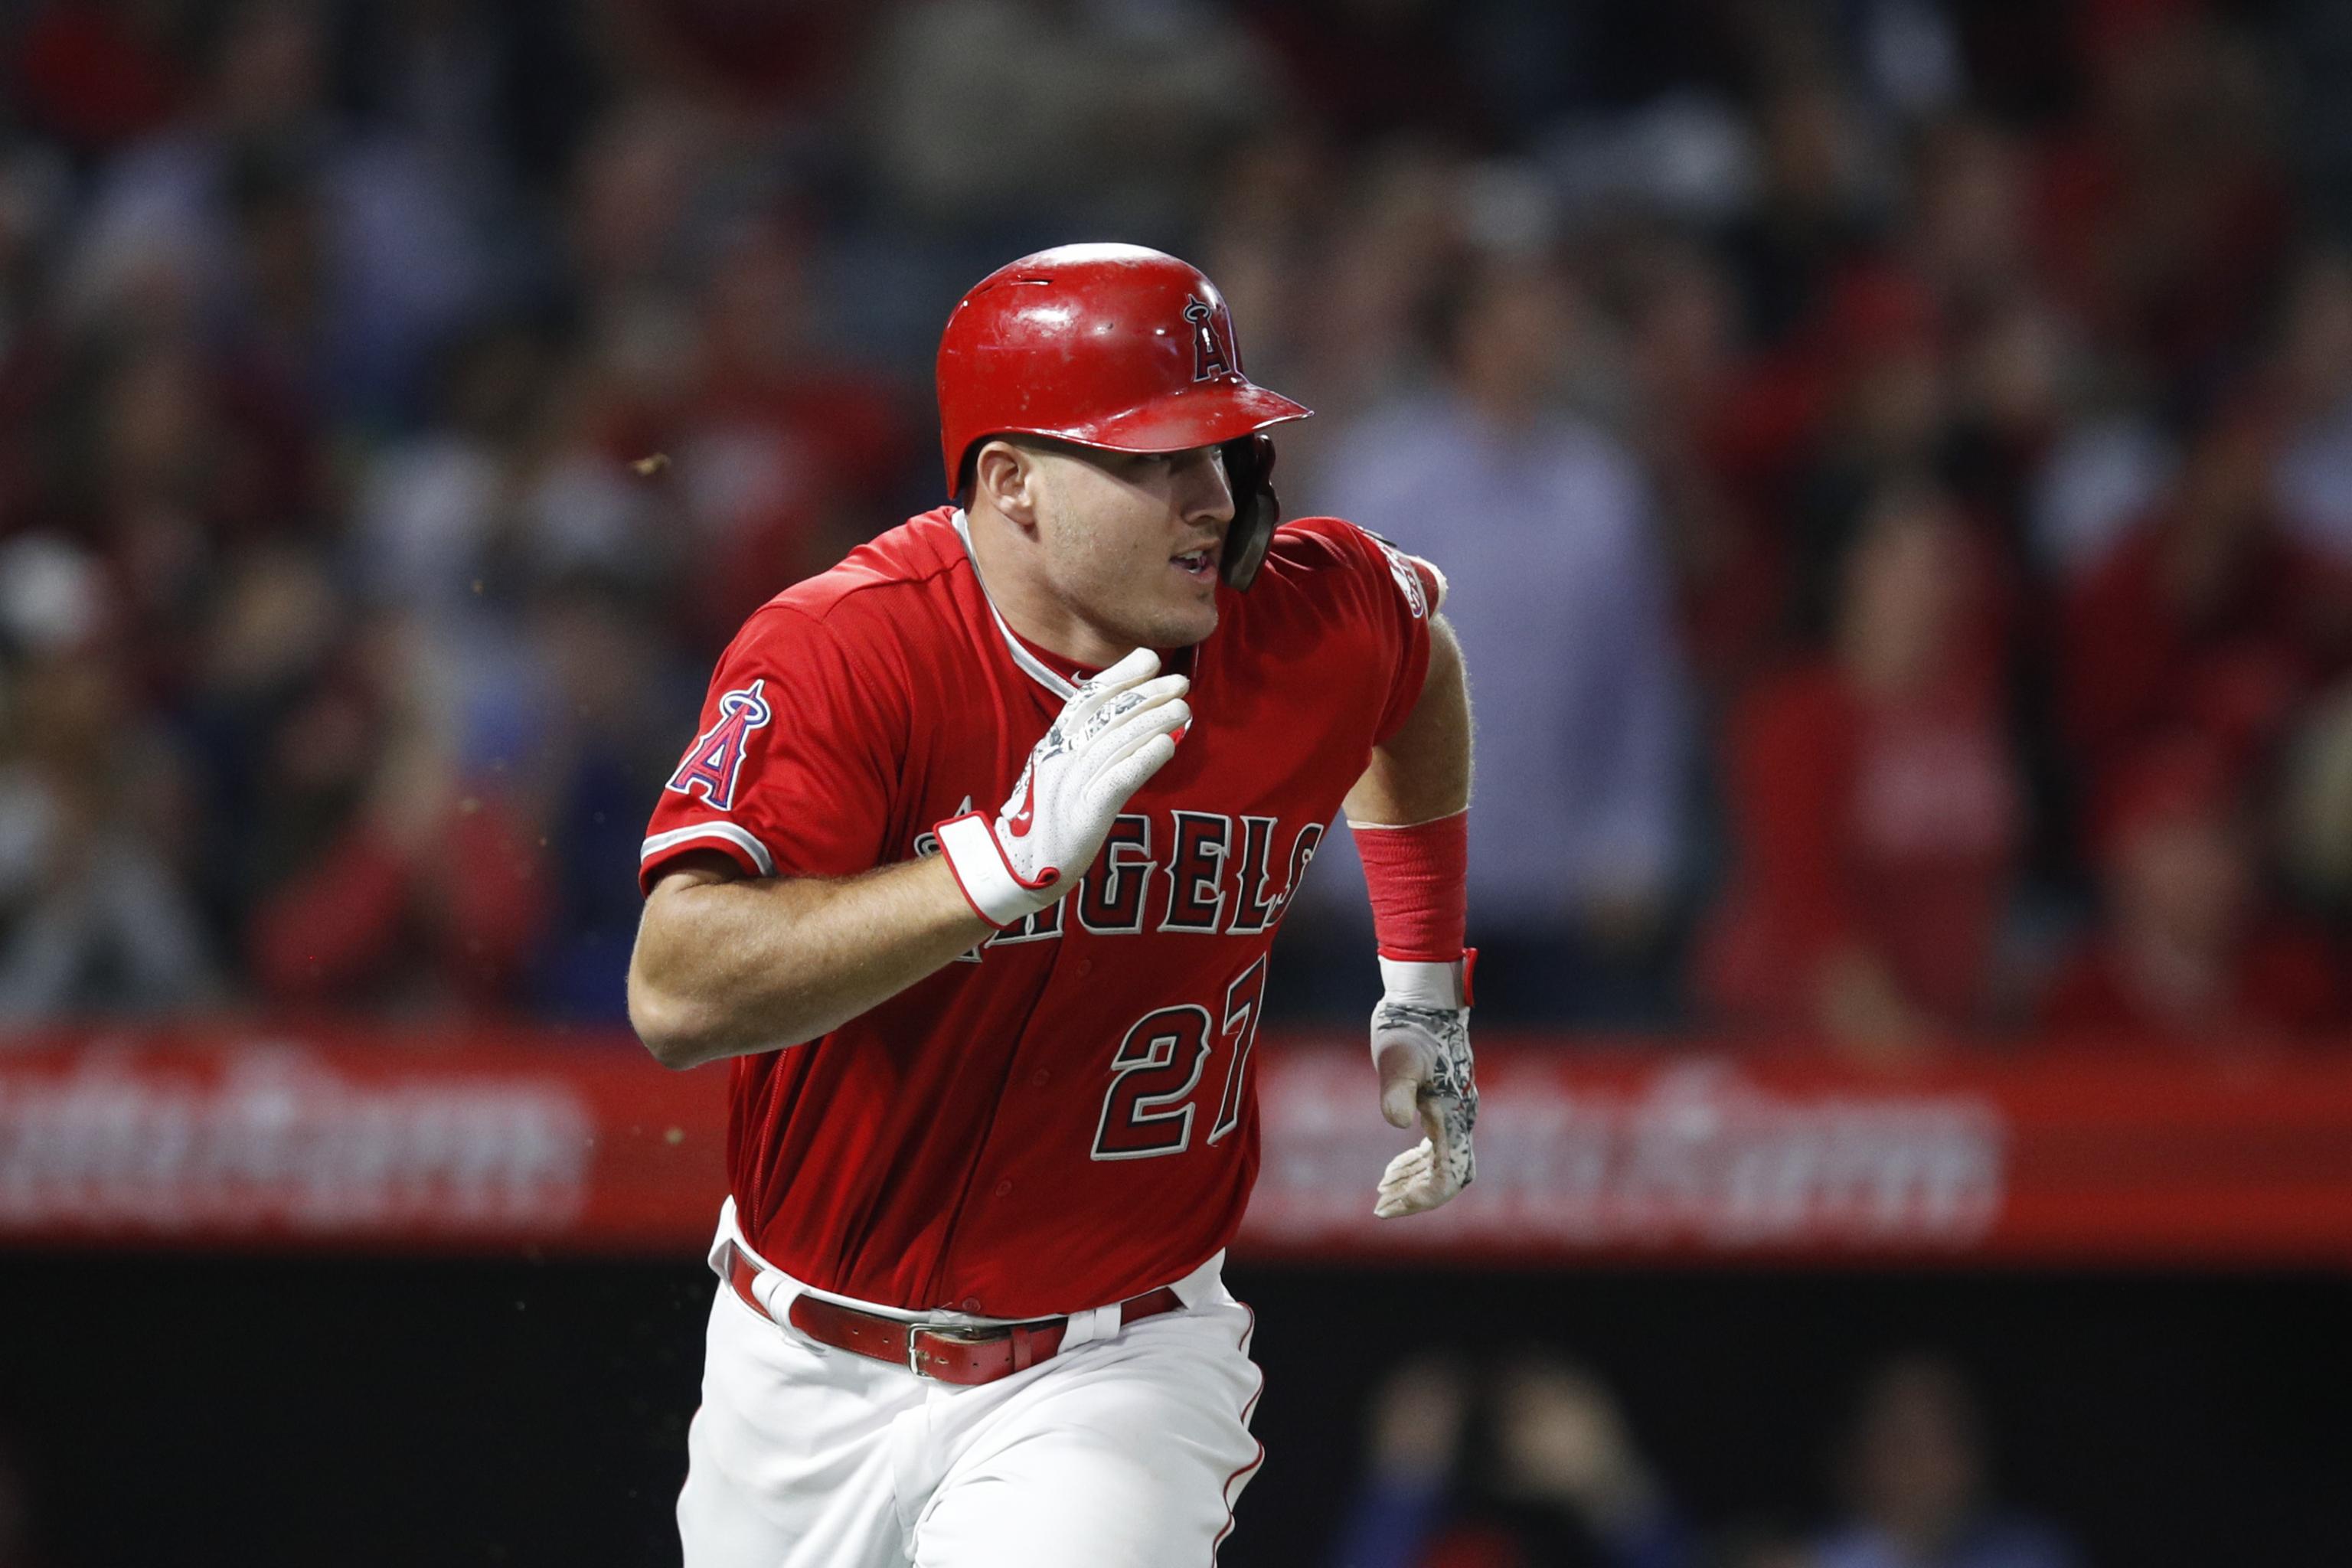 Angels' Mike Trout Second-Youngest Player to Take Home All-Star Game MVP  Honors, News, Scores, Highlights, Stats, and Rumors